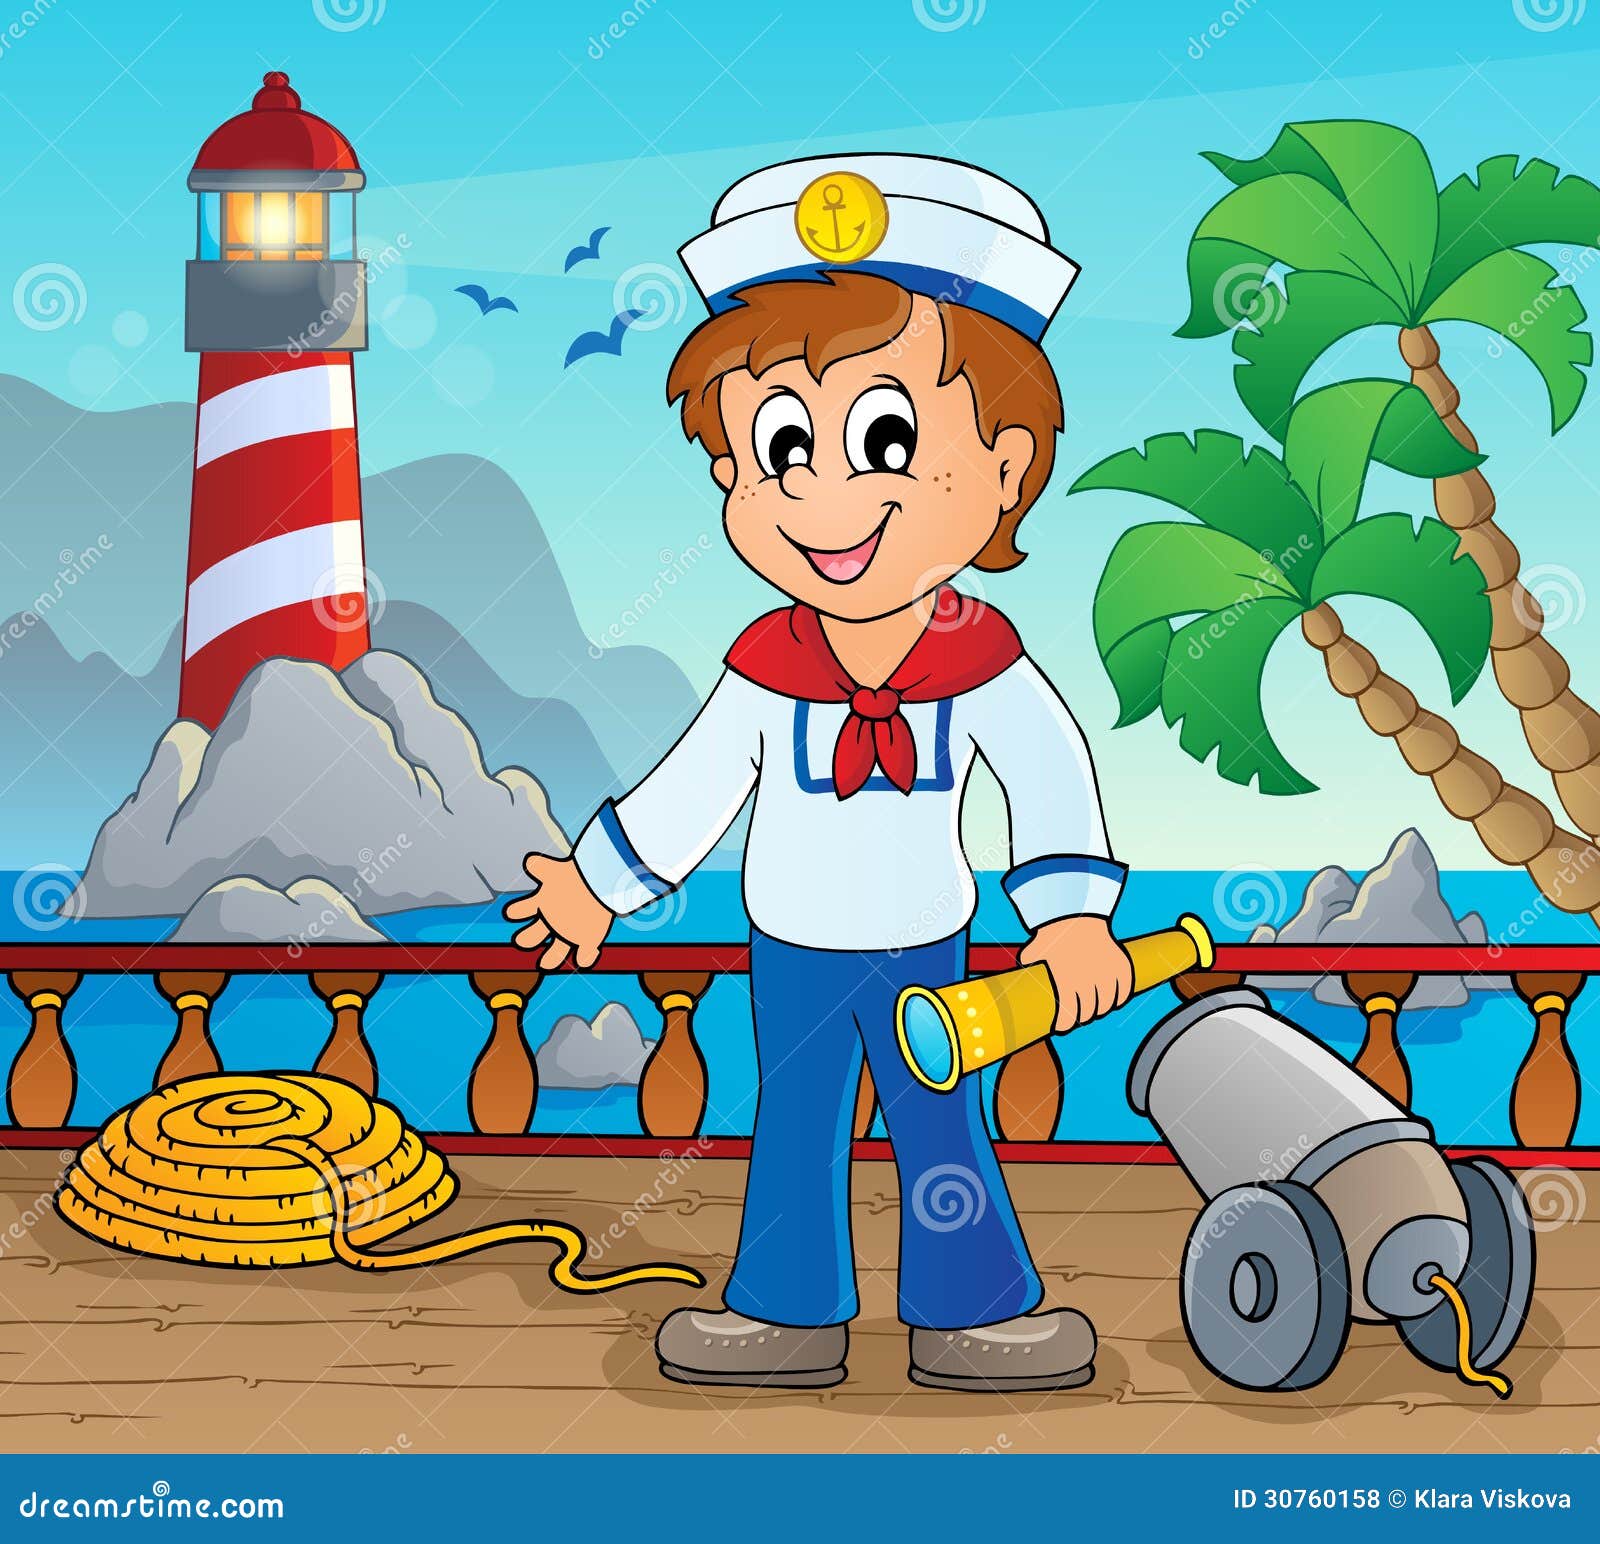 image with sailor theme 2